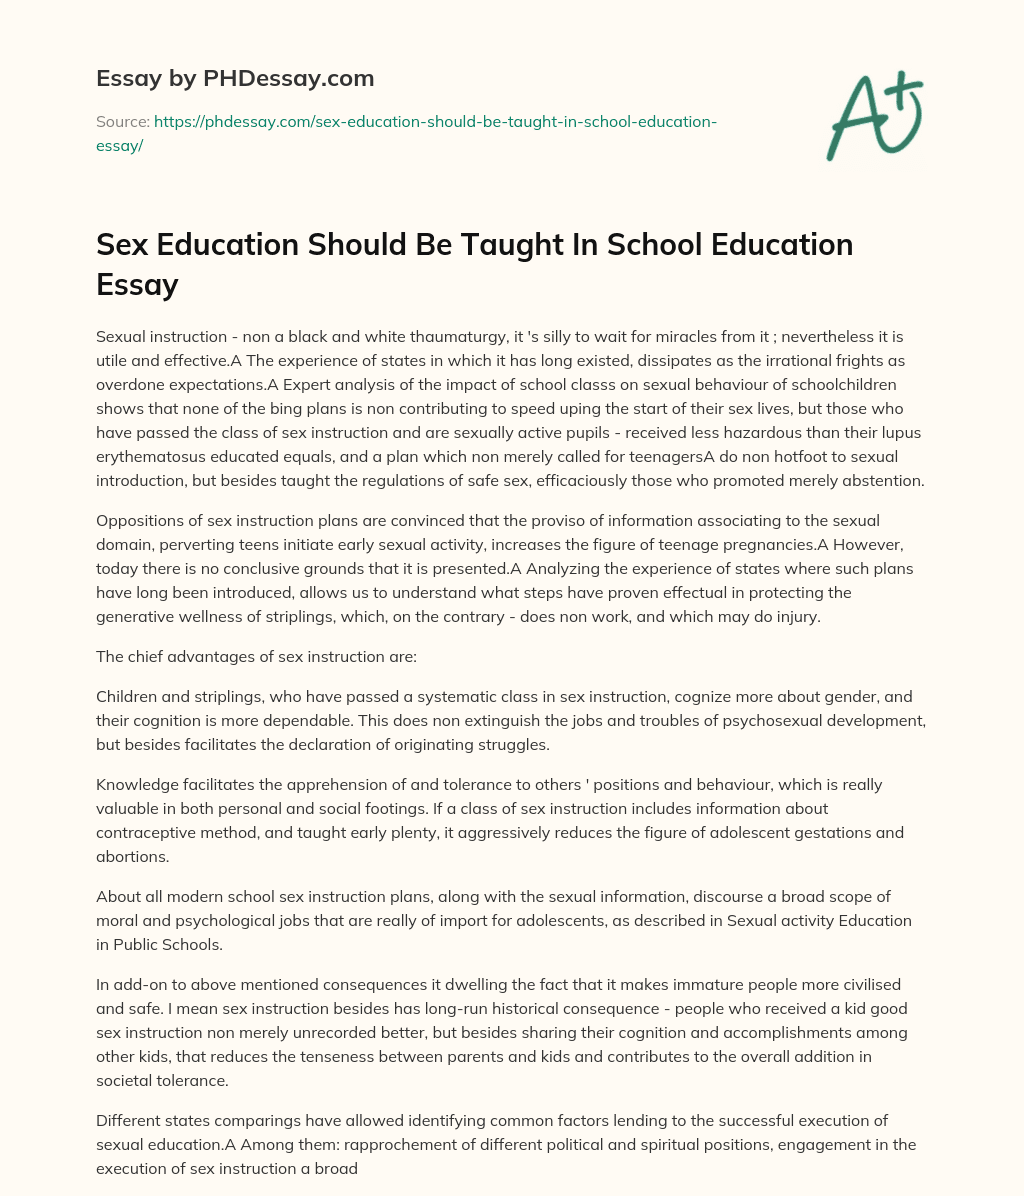 Sex Education Should Be Taught In School Education Essay